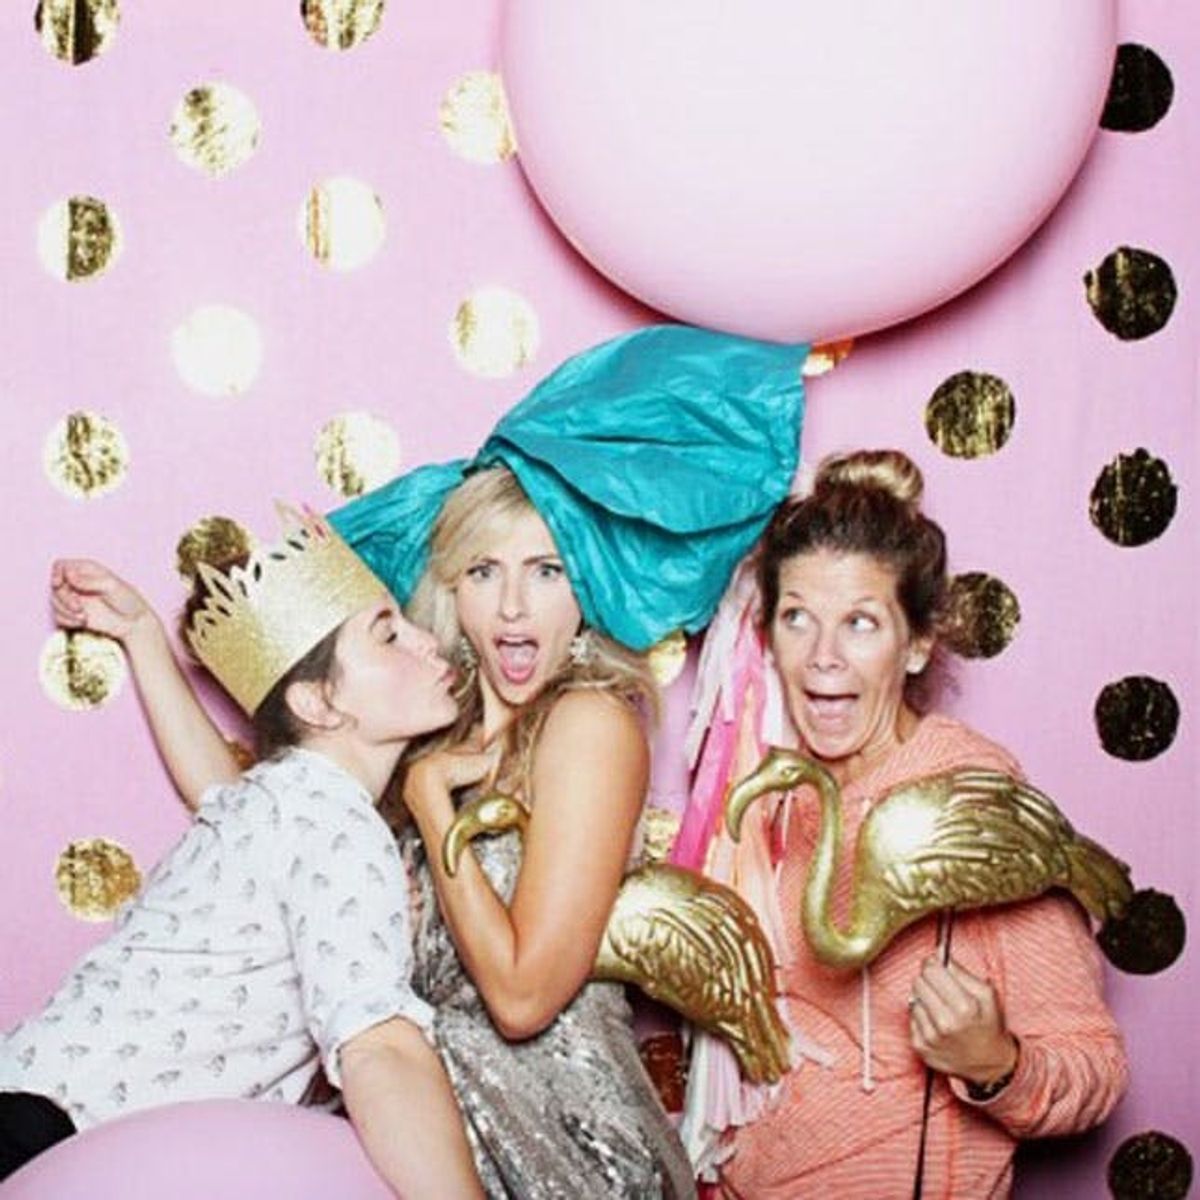 9 Ways to Plan the Best Bachelorette Party Ever